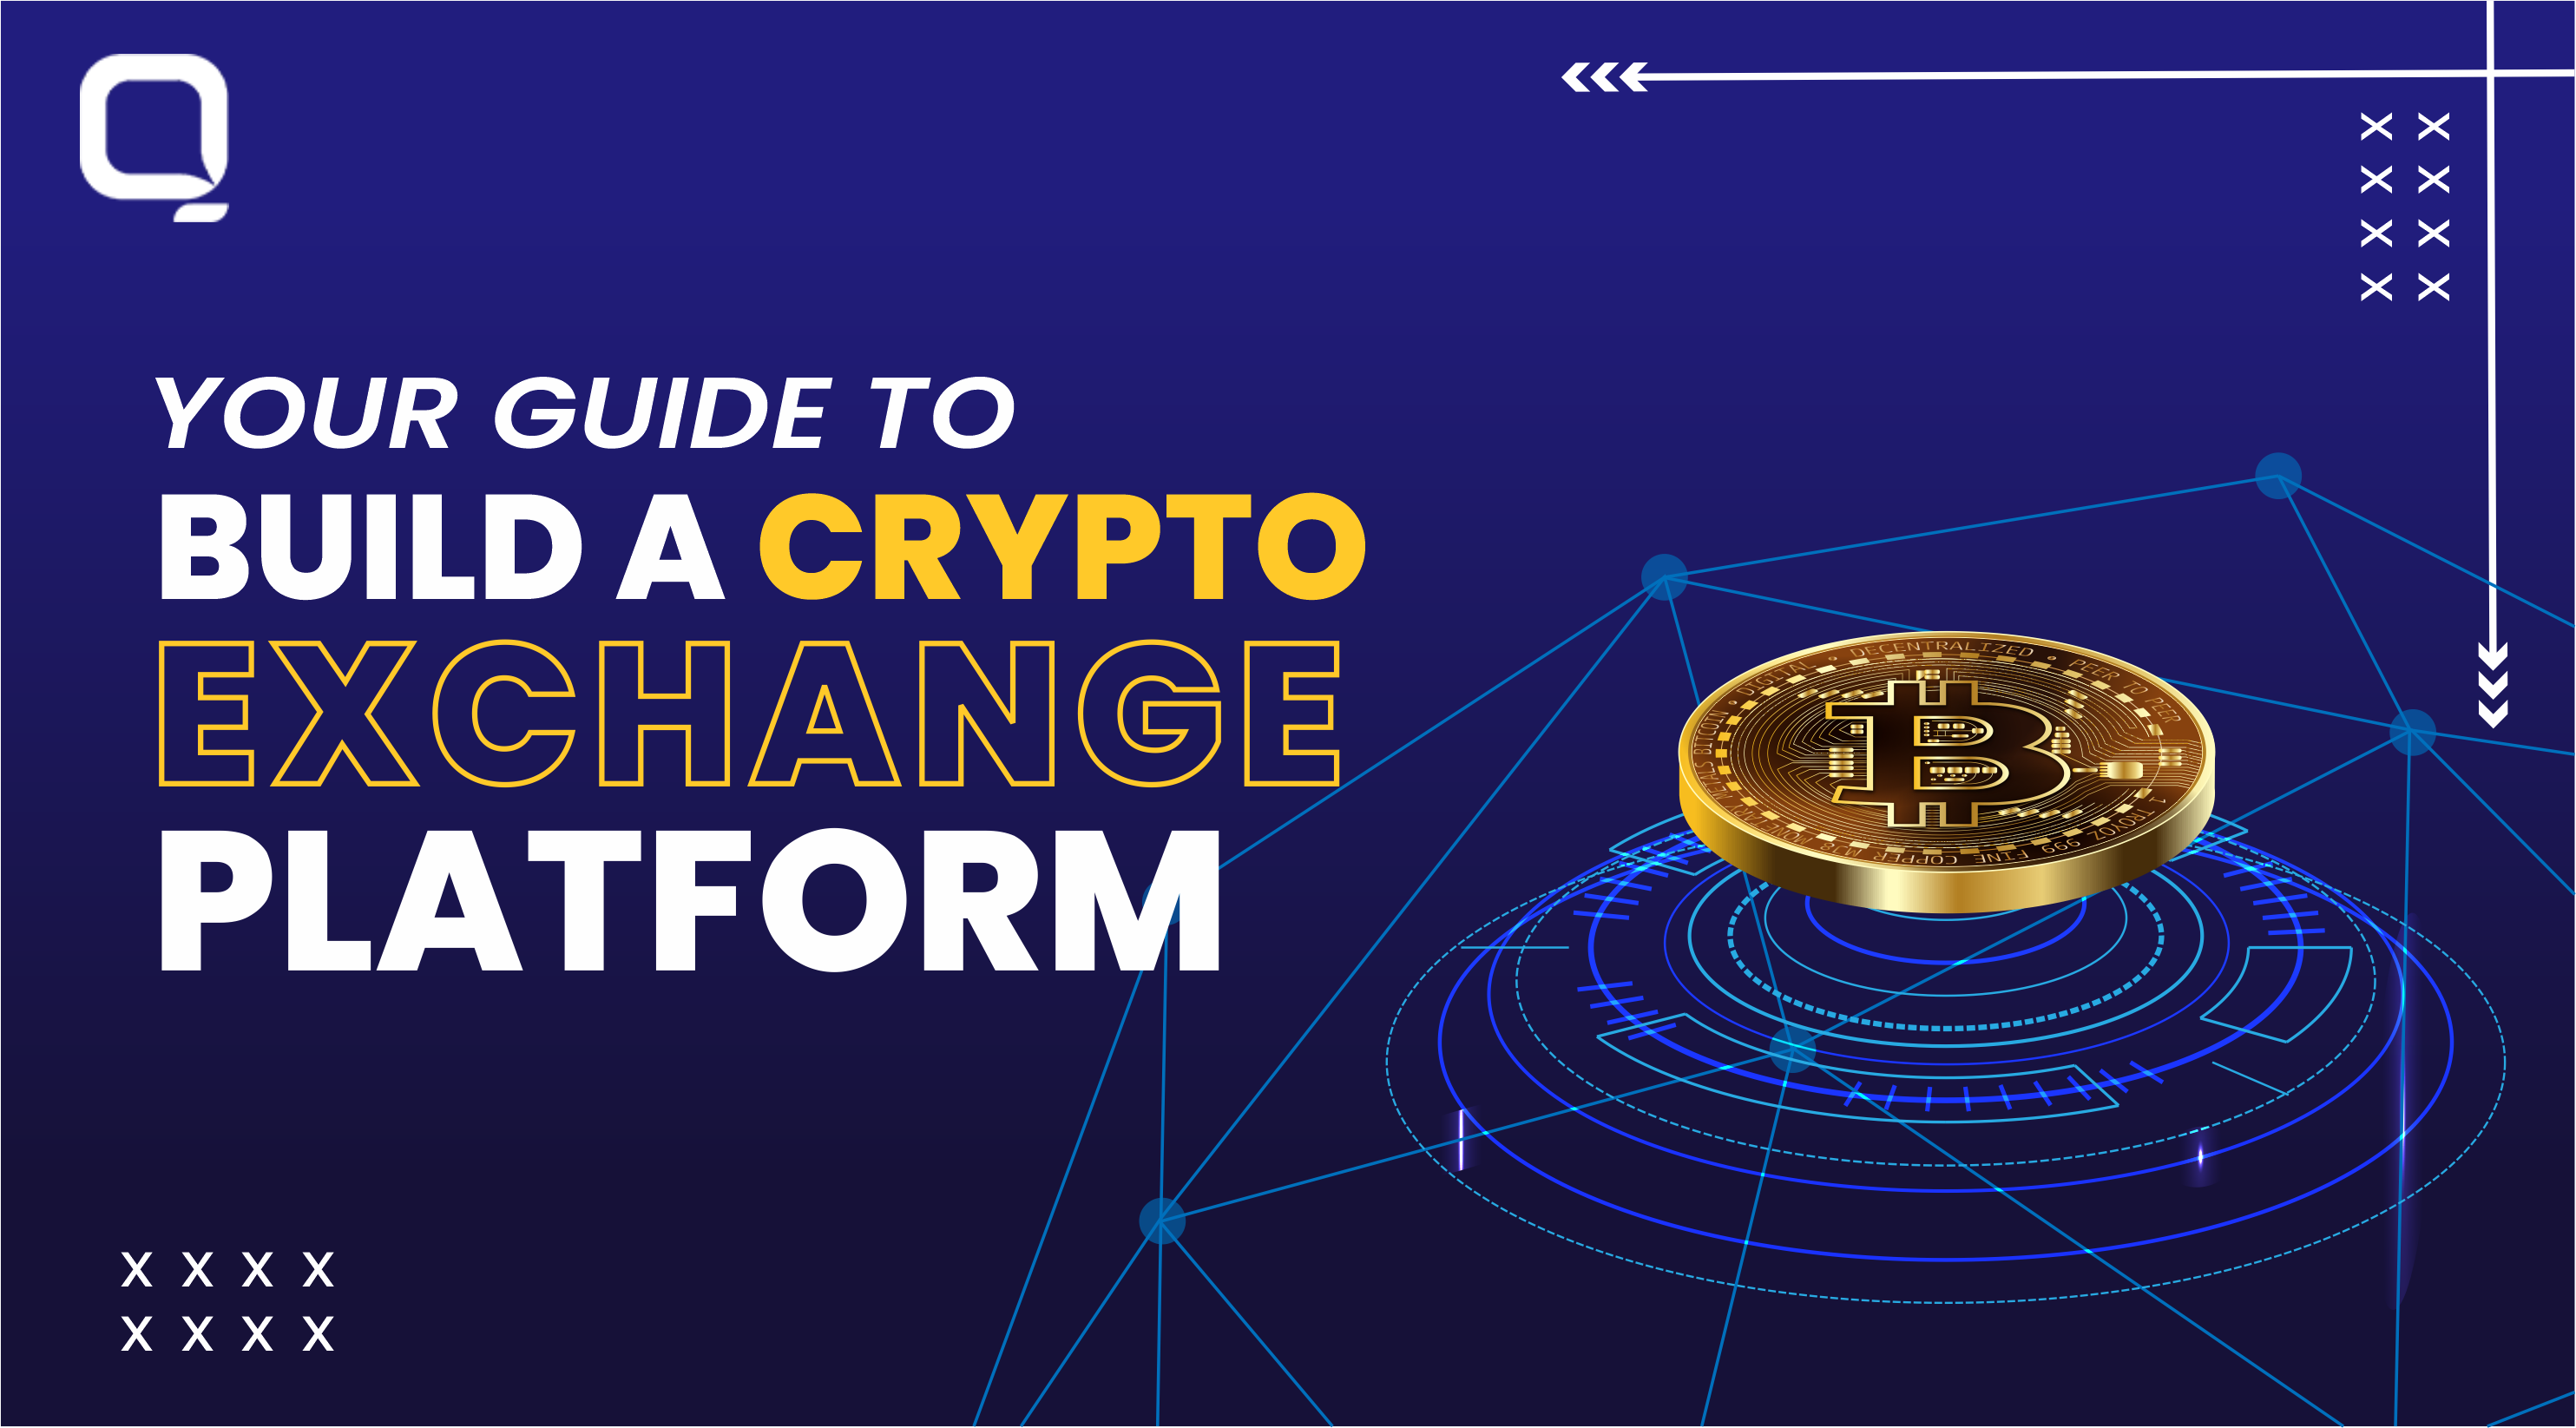 Guide to Build a Crypto Exchange Platform